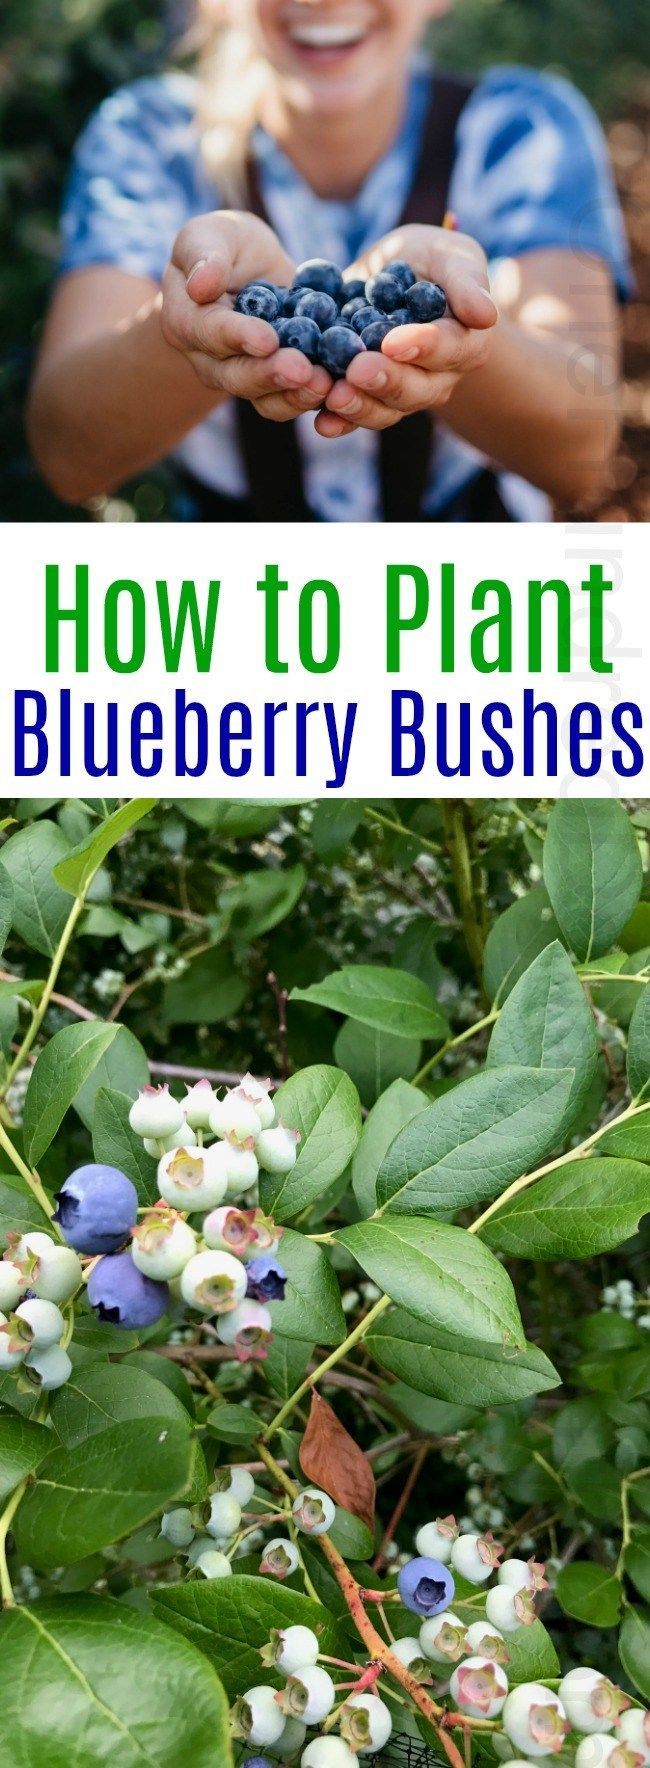 How to Plant a Blueberry Bush -   16 planting to get ideas